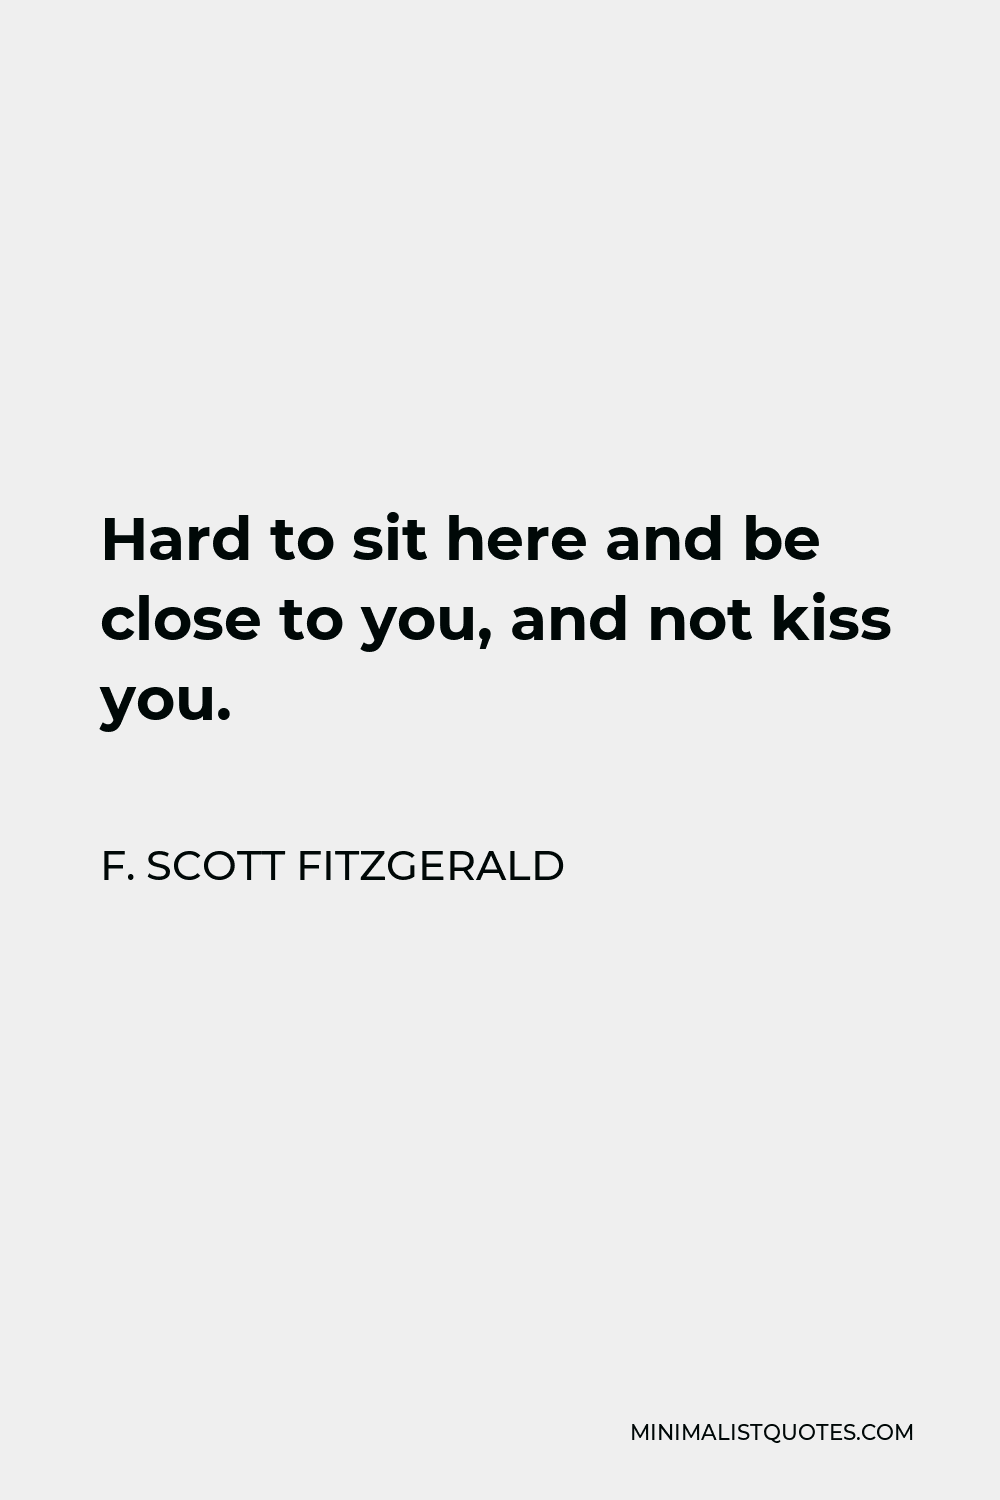 F. Scott Fitzgerald Quote - Hard to sit here and be close to you, and not kiss you.